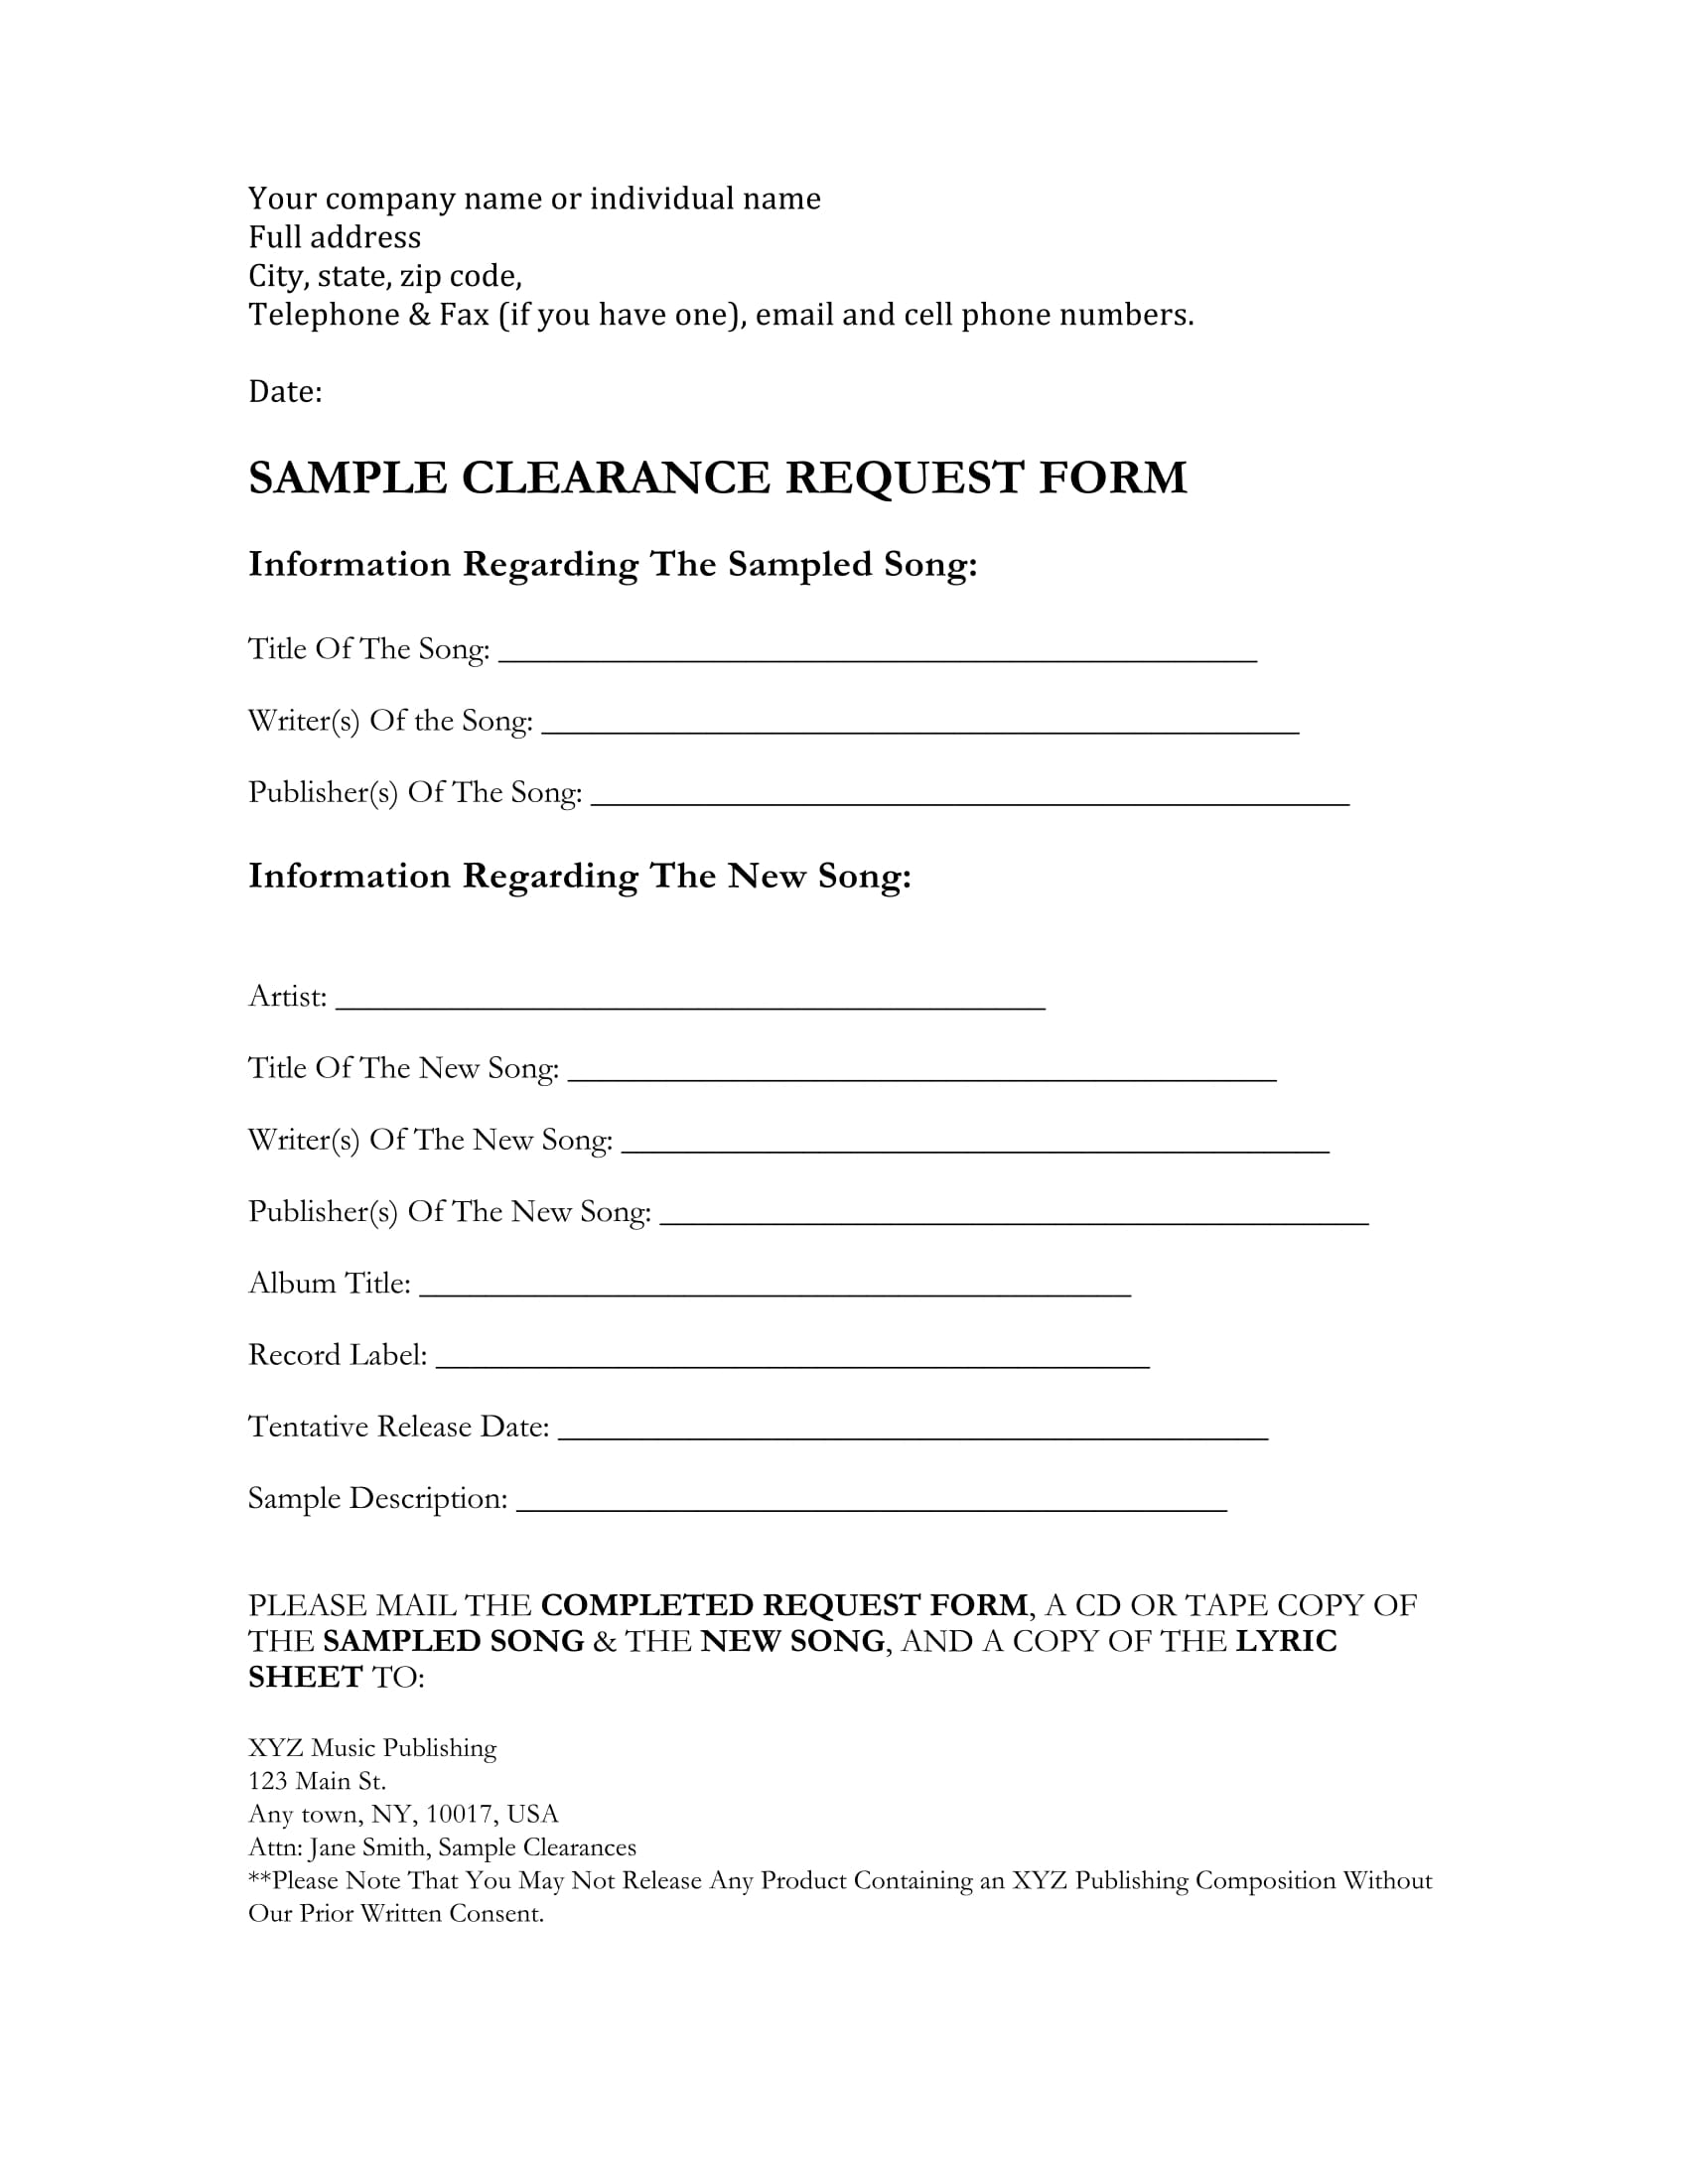 sample clearance request form 1